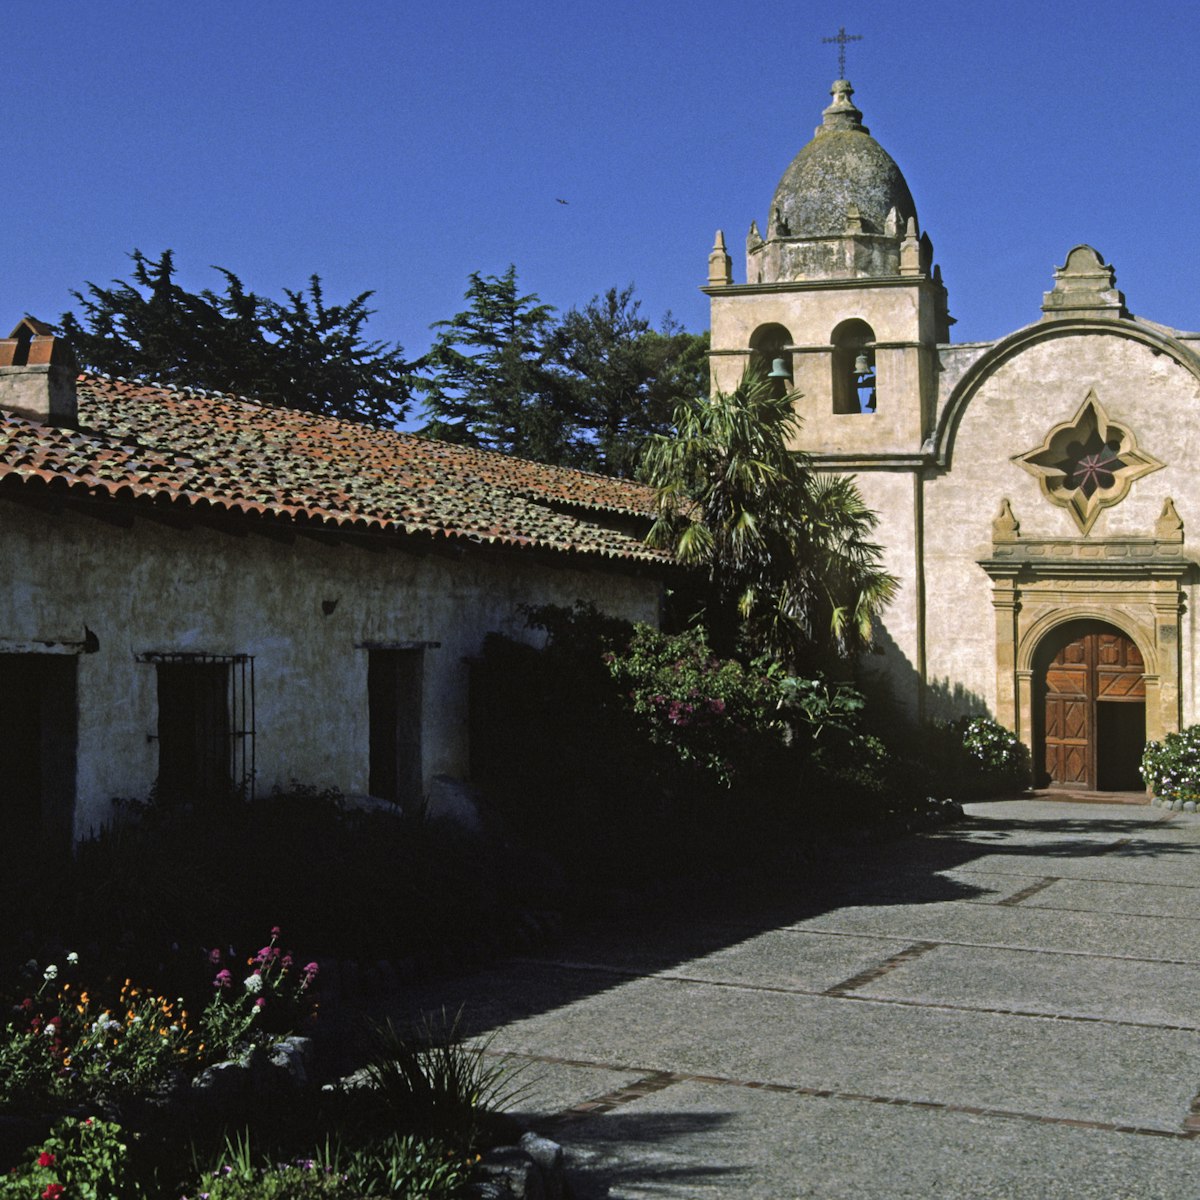 Father Junipero Serra Founded The Carmel Mission With The Help Of The Local Indian Population, Carmel, California. (Photo By: Education Images/UIG via Getty Images)